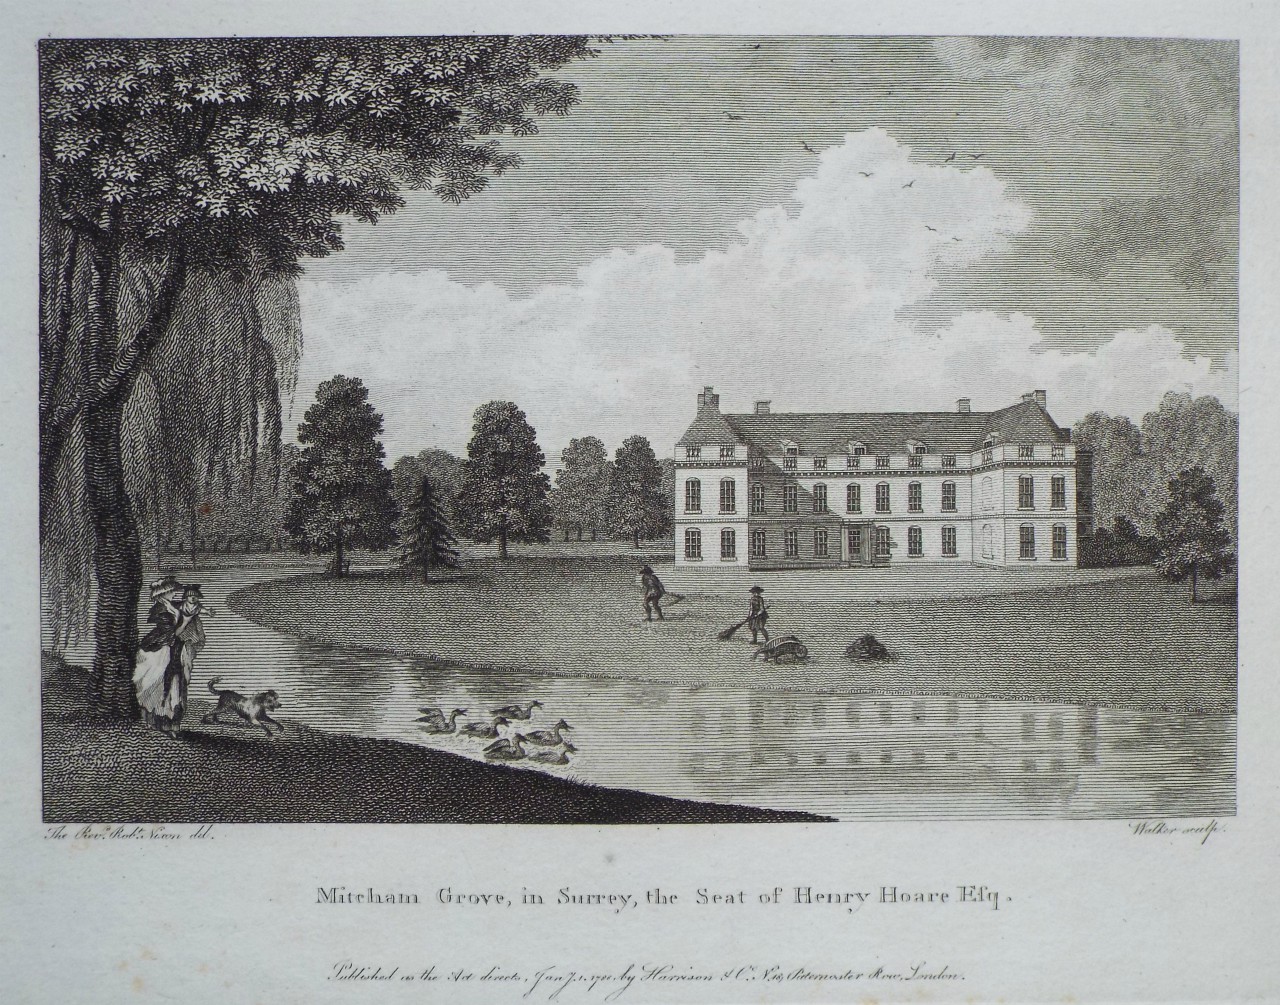 Print - Mitcham Grove, in Surrey, the Seat of Henry Hoare Esq. - 